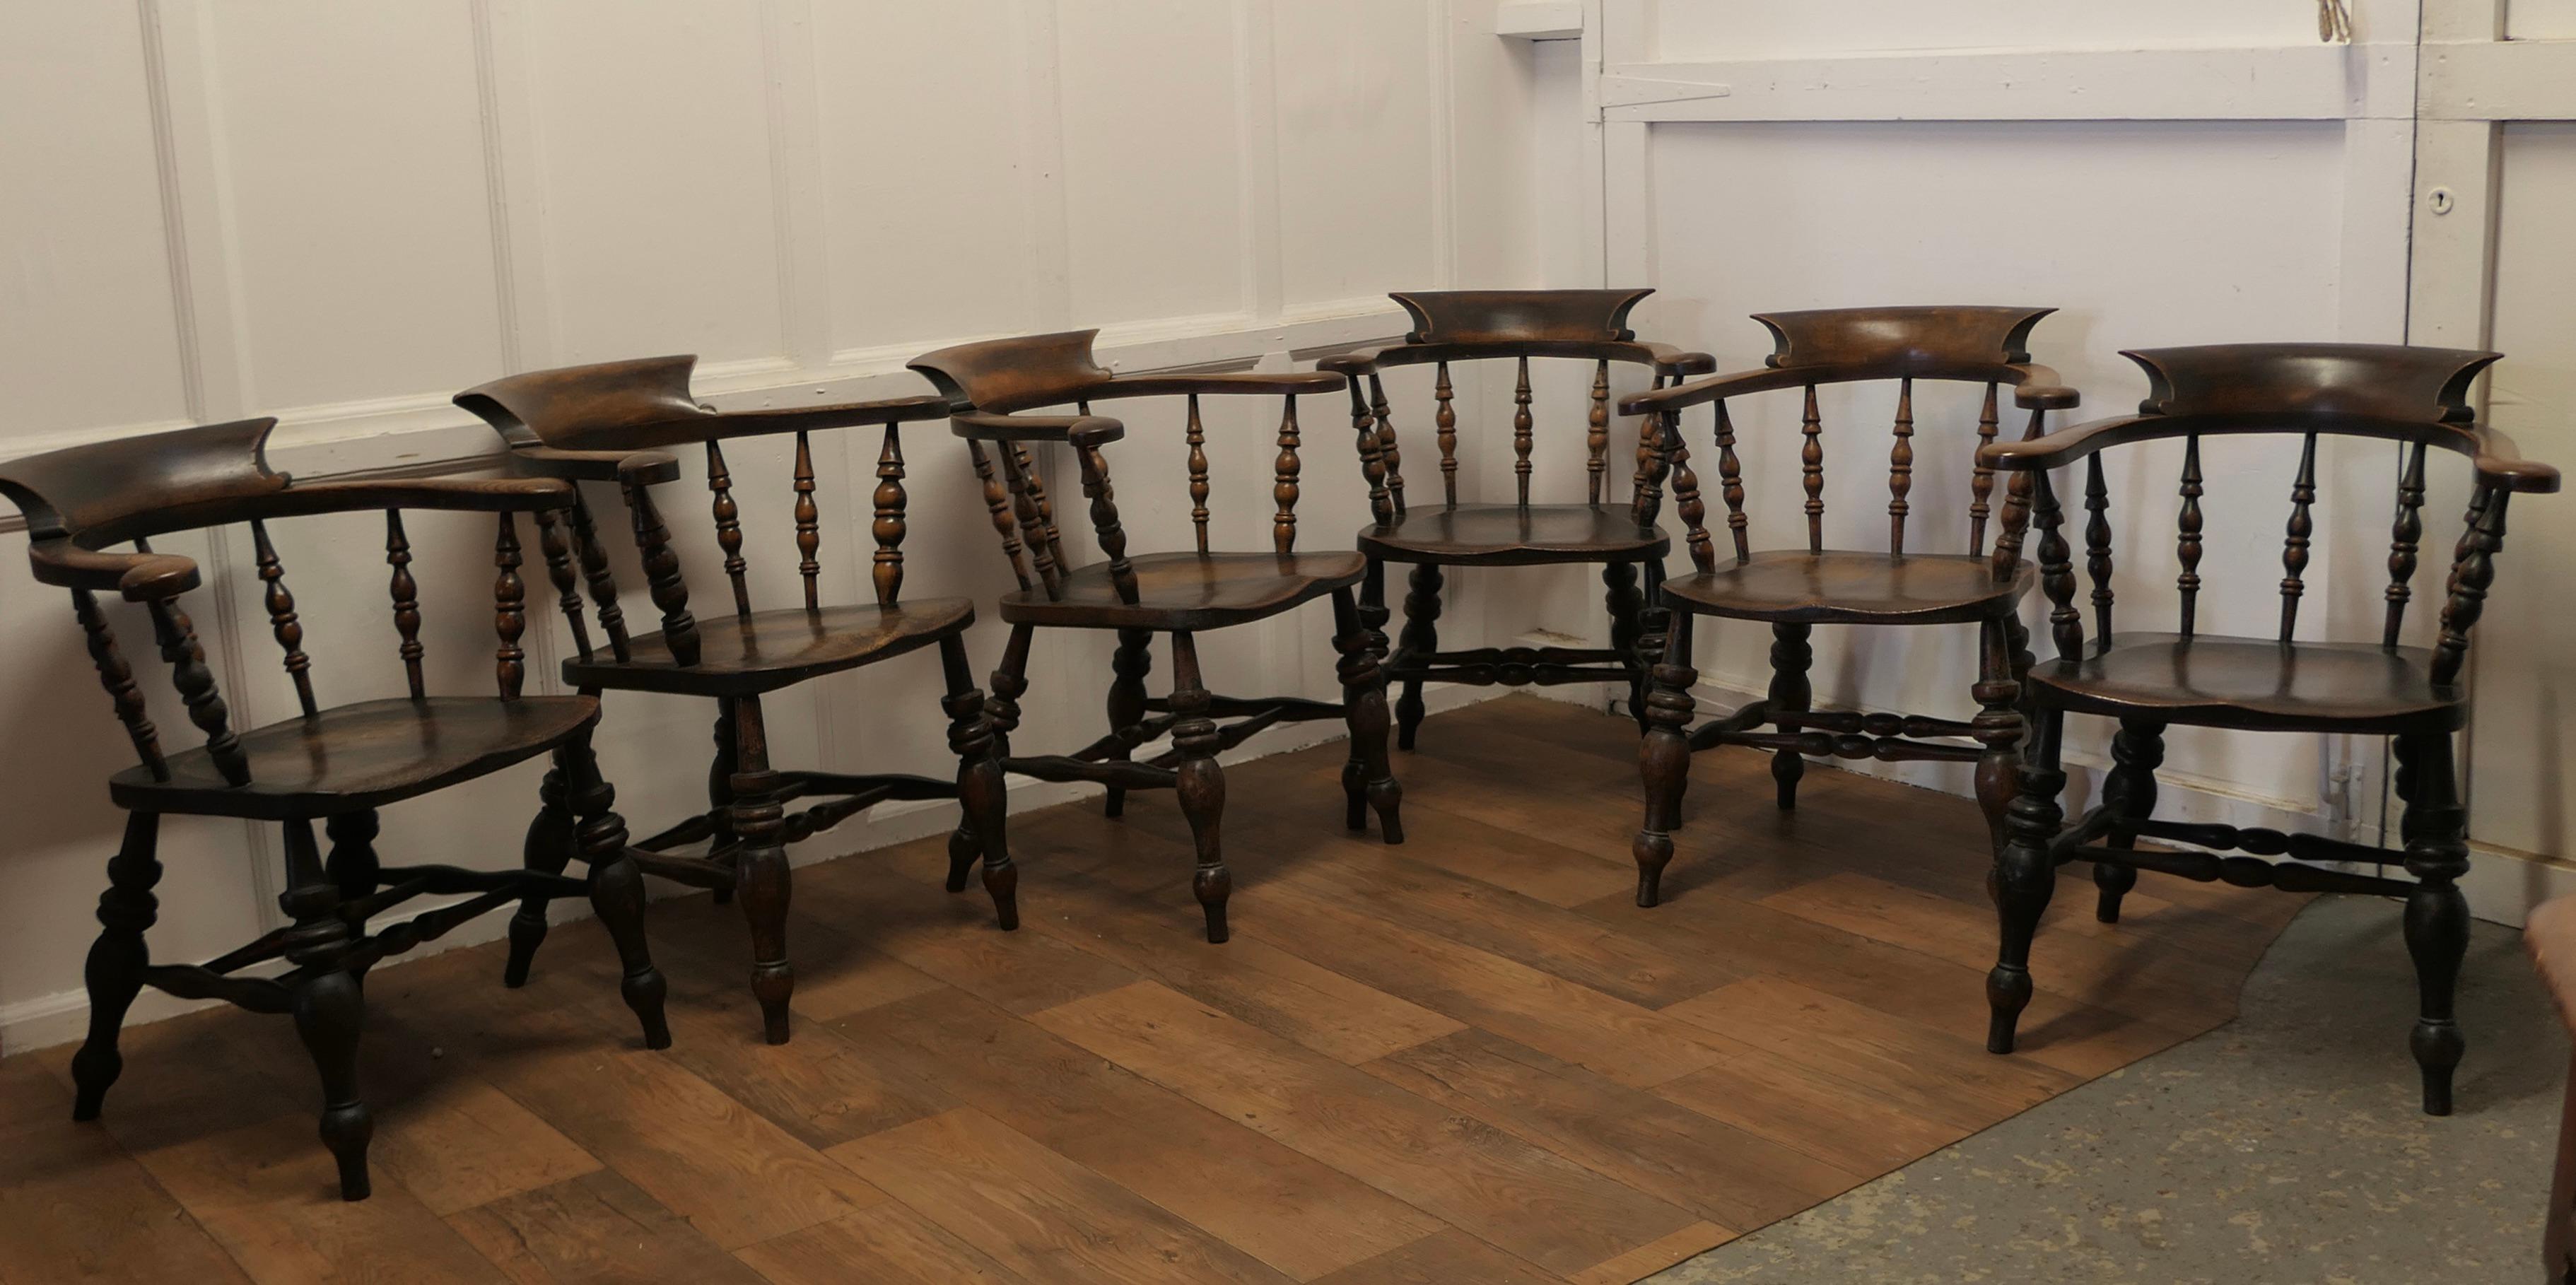 Set of 6 English Oak and Elm Windsor Carver Chairs

This style is known by many names Smokers Bow, Windsor Chairs or Captain’s Chairs 

A very rare original set of 6 English Oak and Elm Windsor Carver Chairs, all in very good original condition with